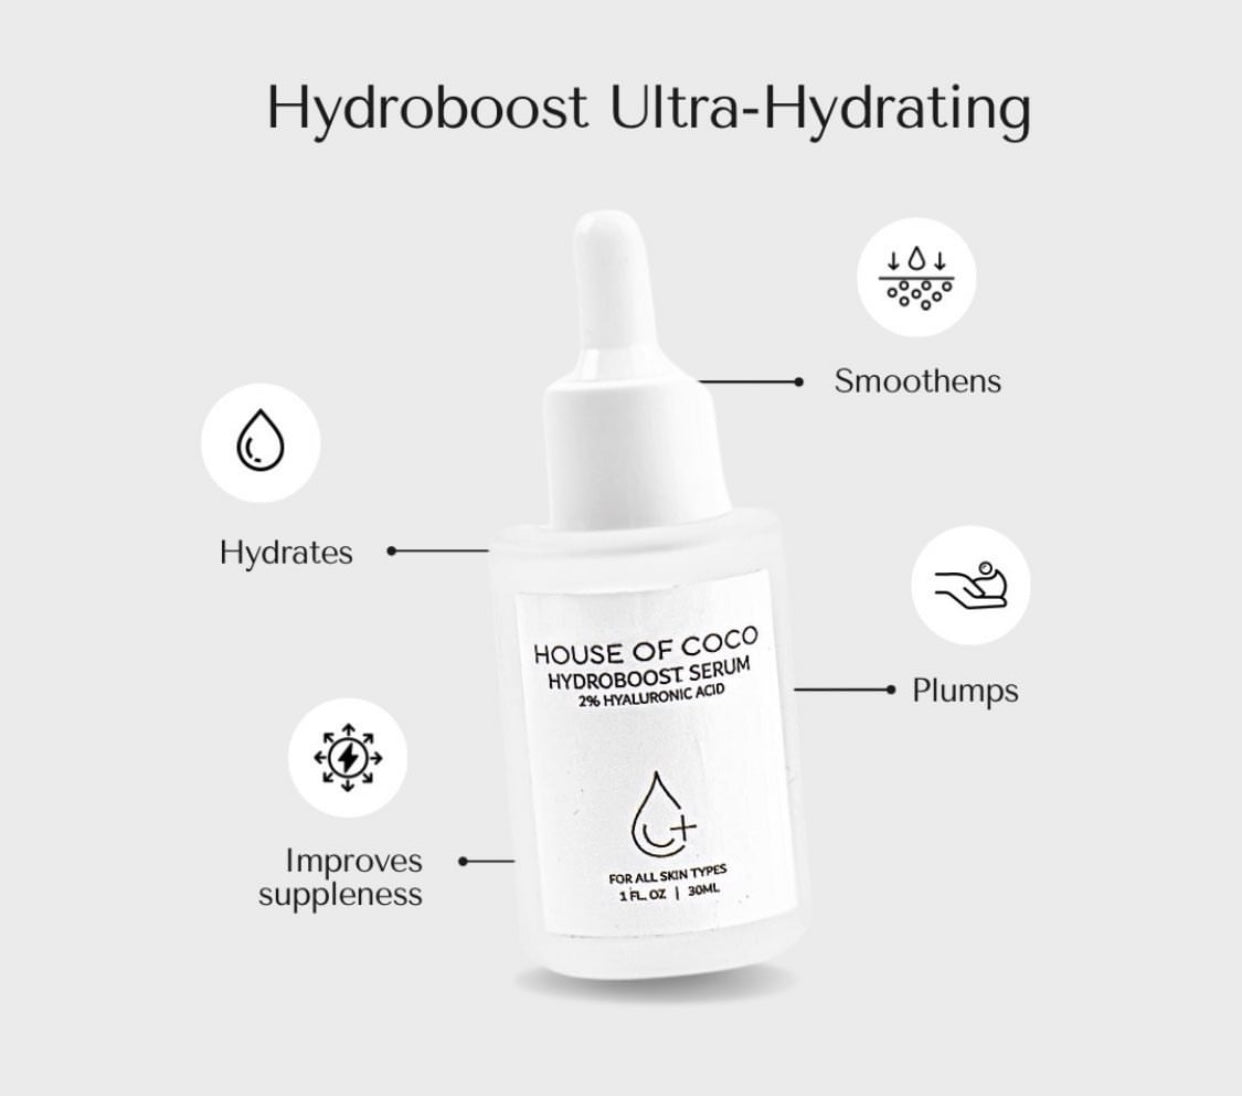 House of Coco Hydro Boost Serum